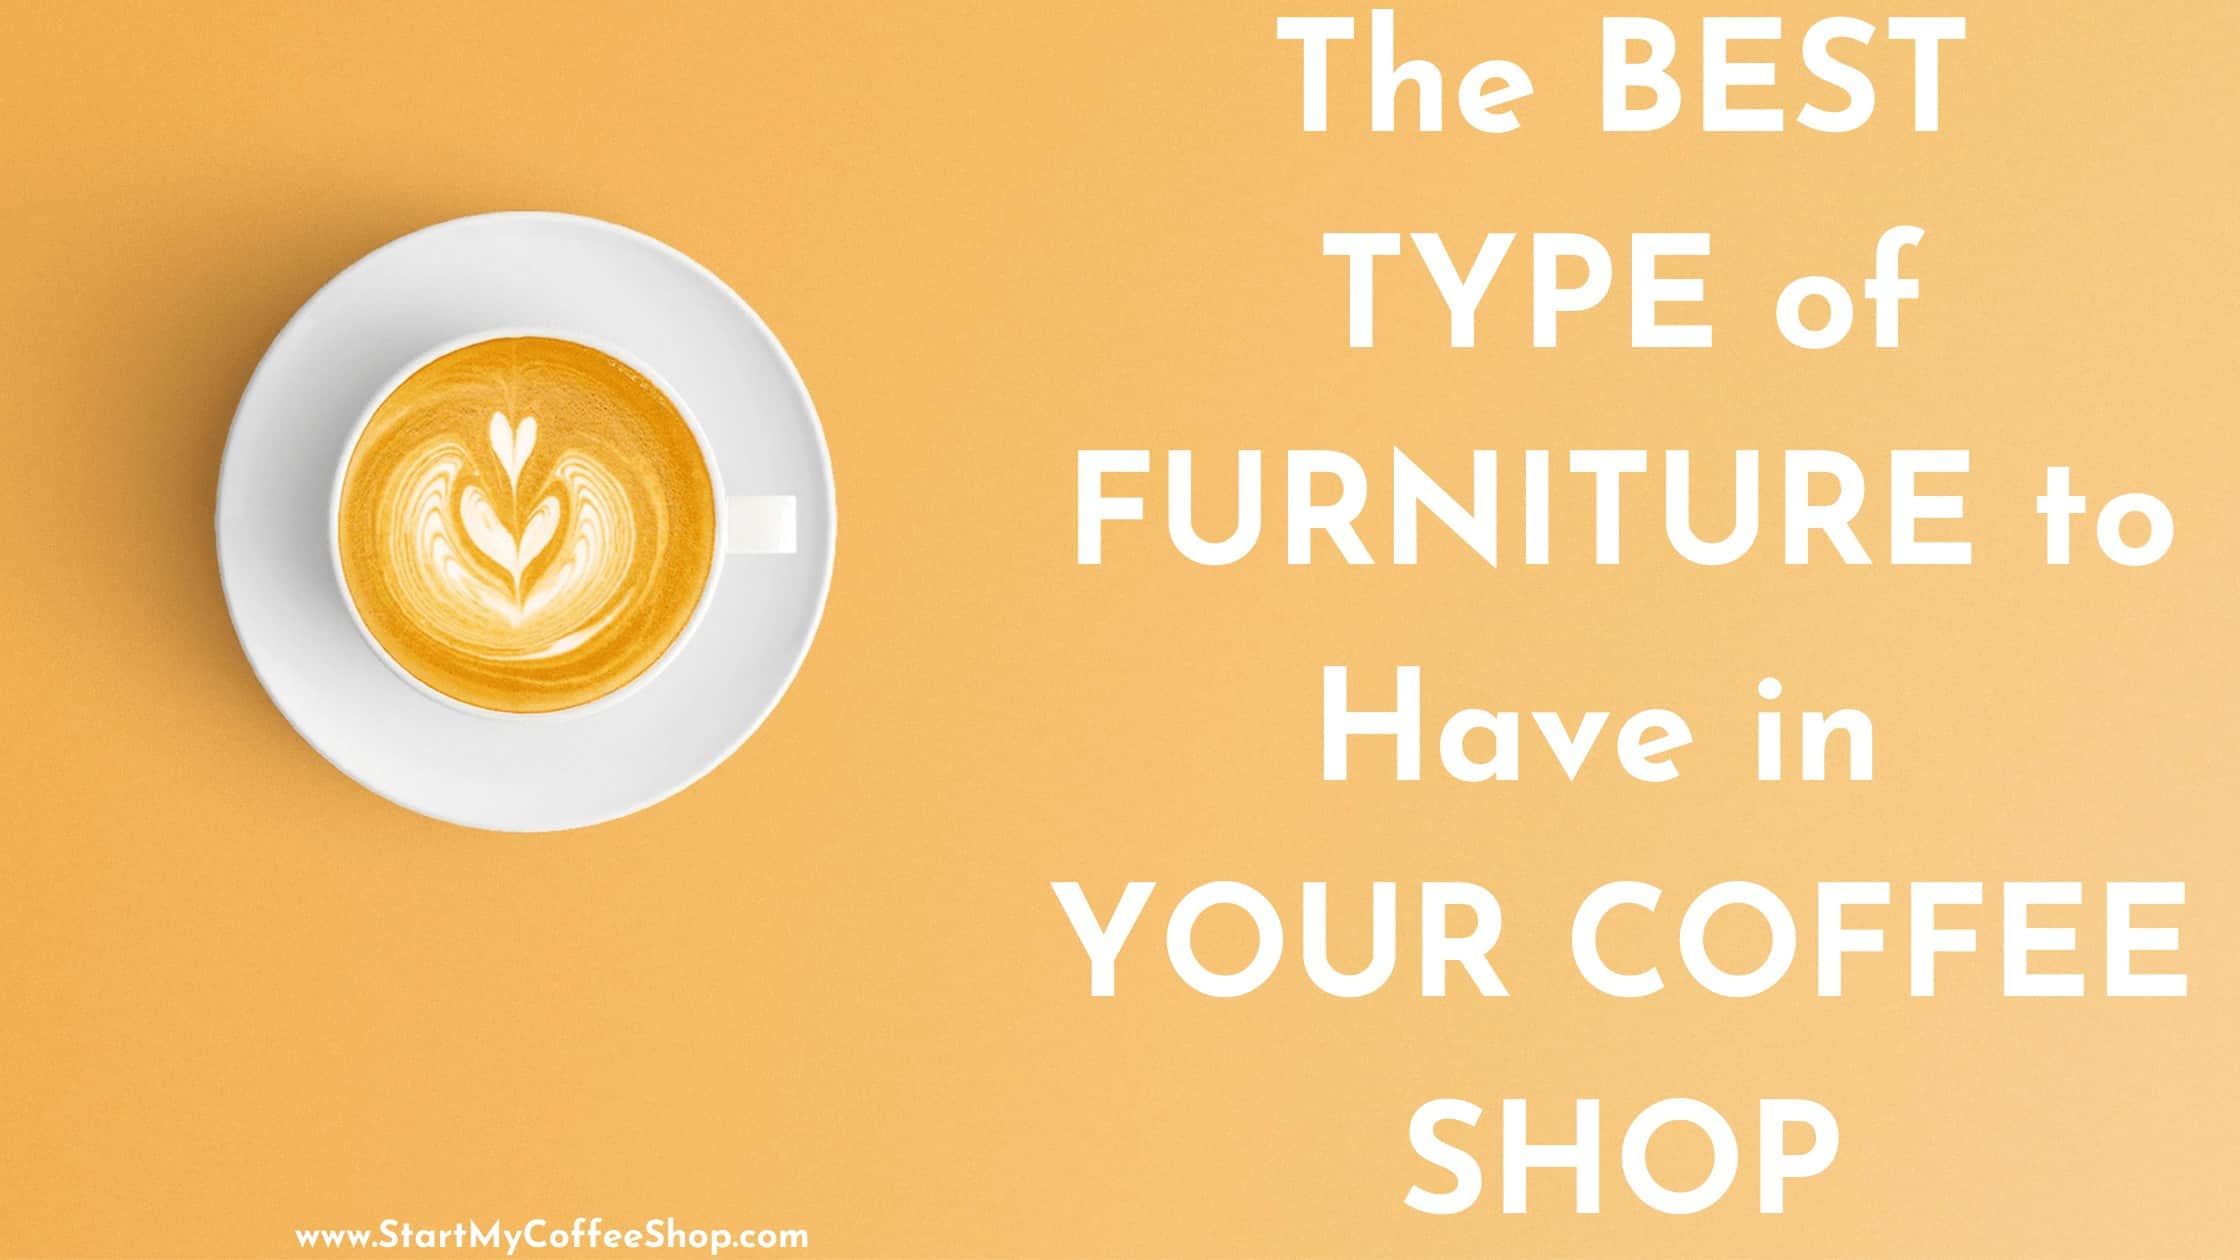 The Best Type of Furniture to have in your coffee shop